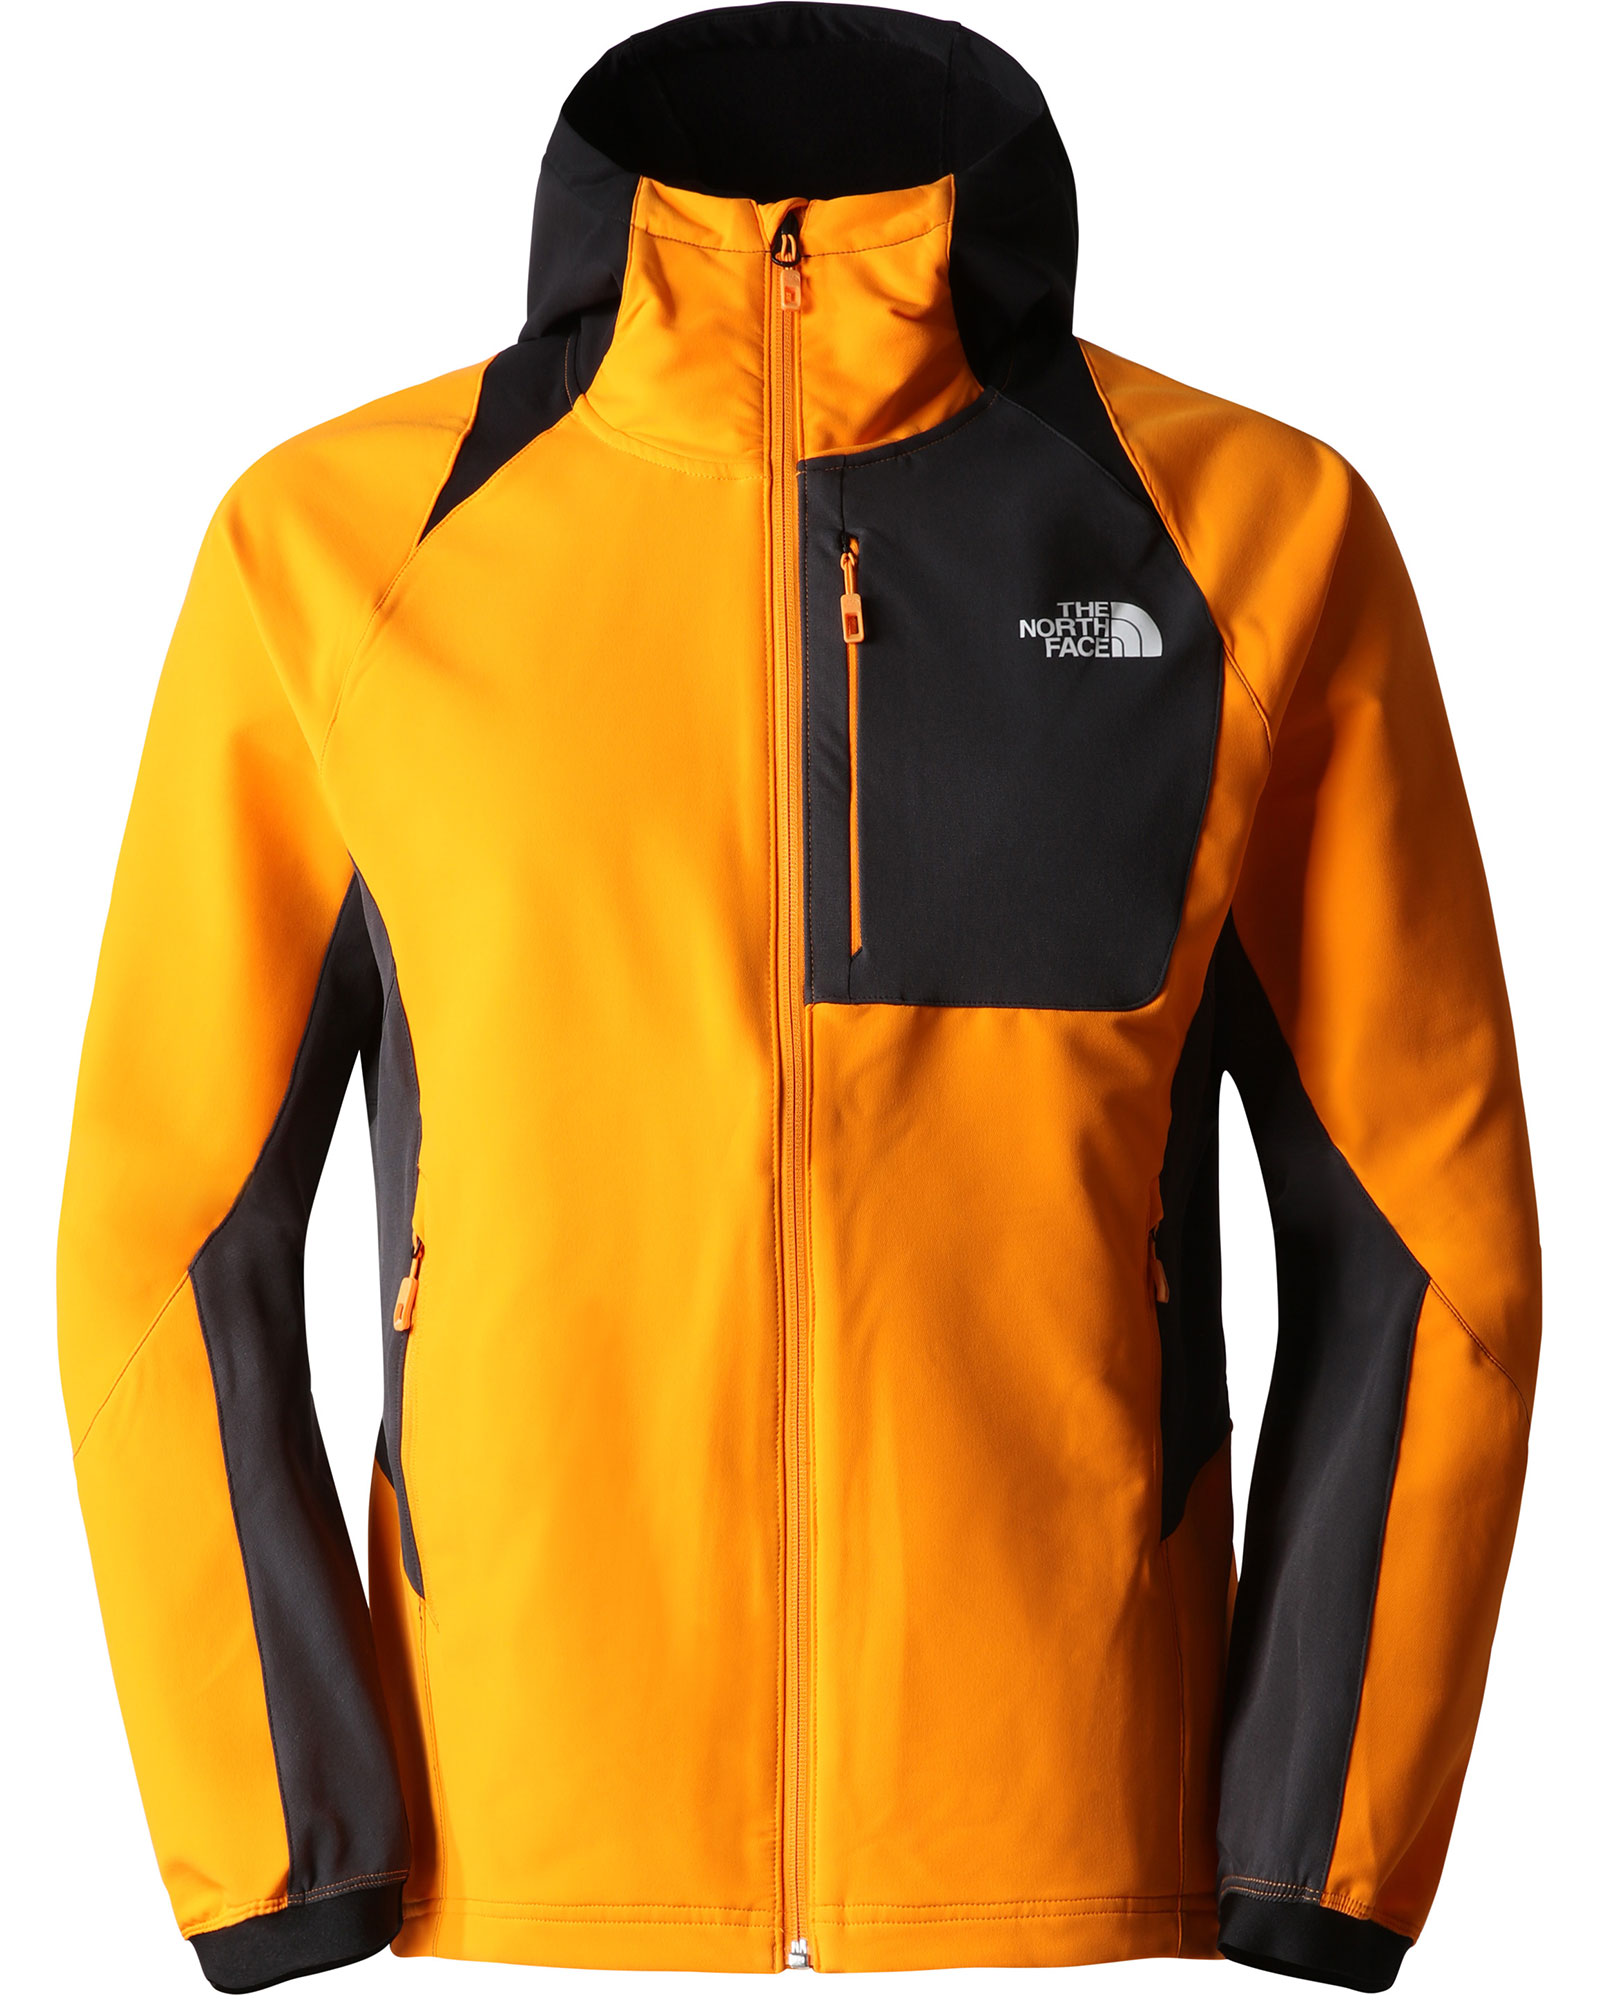 The North Face AO Men’s Softshell Hoodie - Cone Orange S